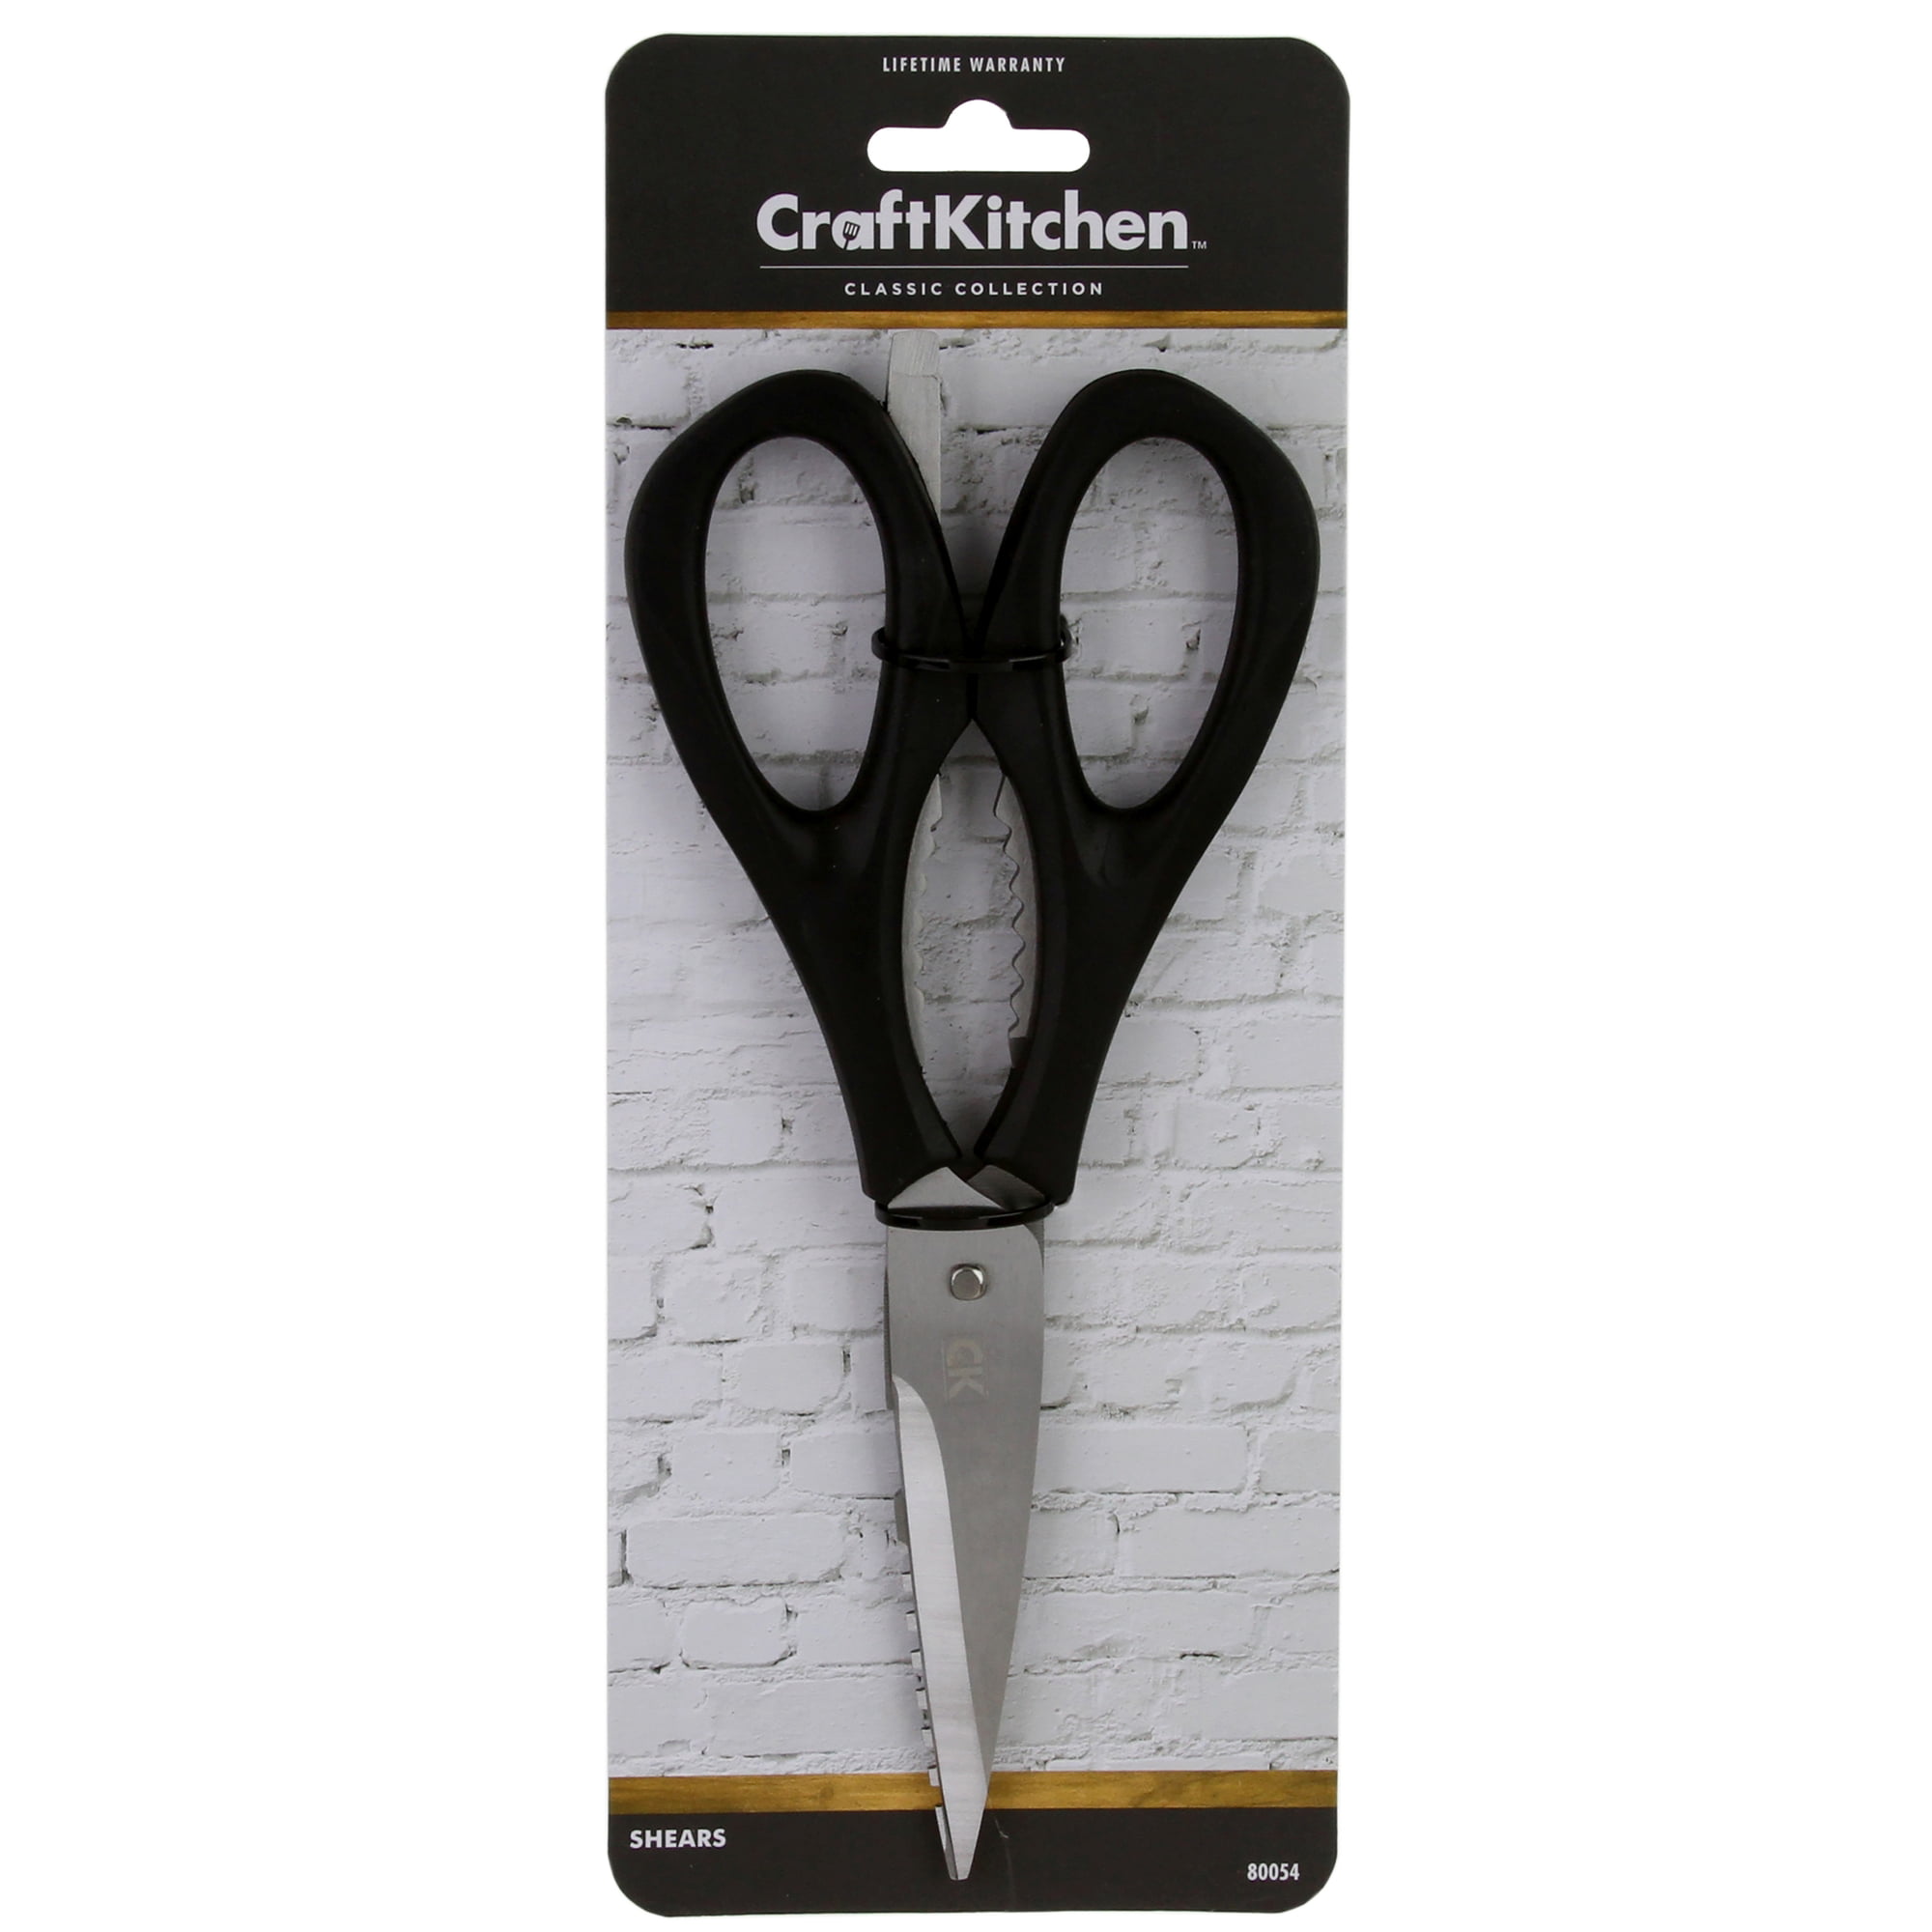 Stainless-Steel Kitchen Shears - Lee Valley Tools